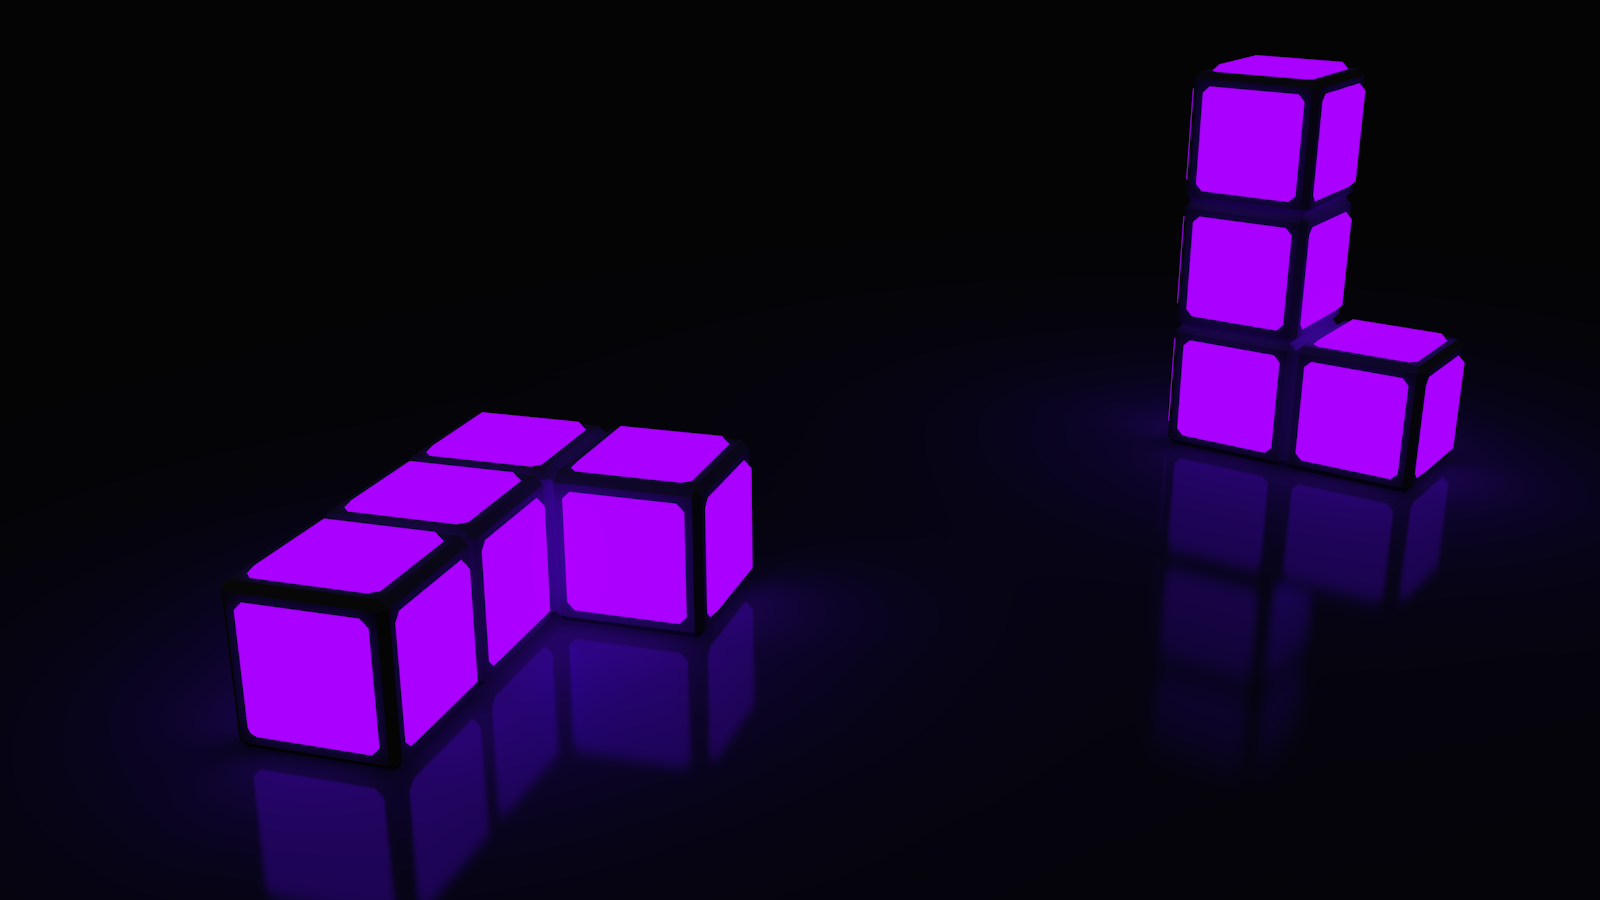 made a few backgrounds i made for myself in Cinema 4D which one is